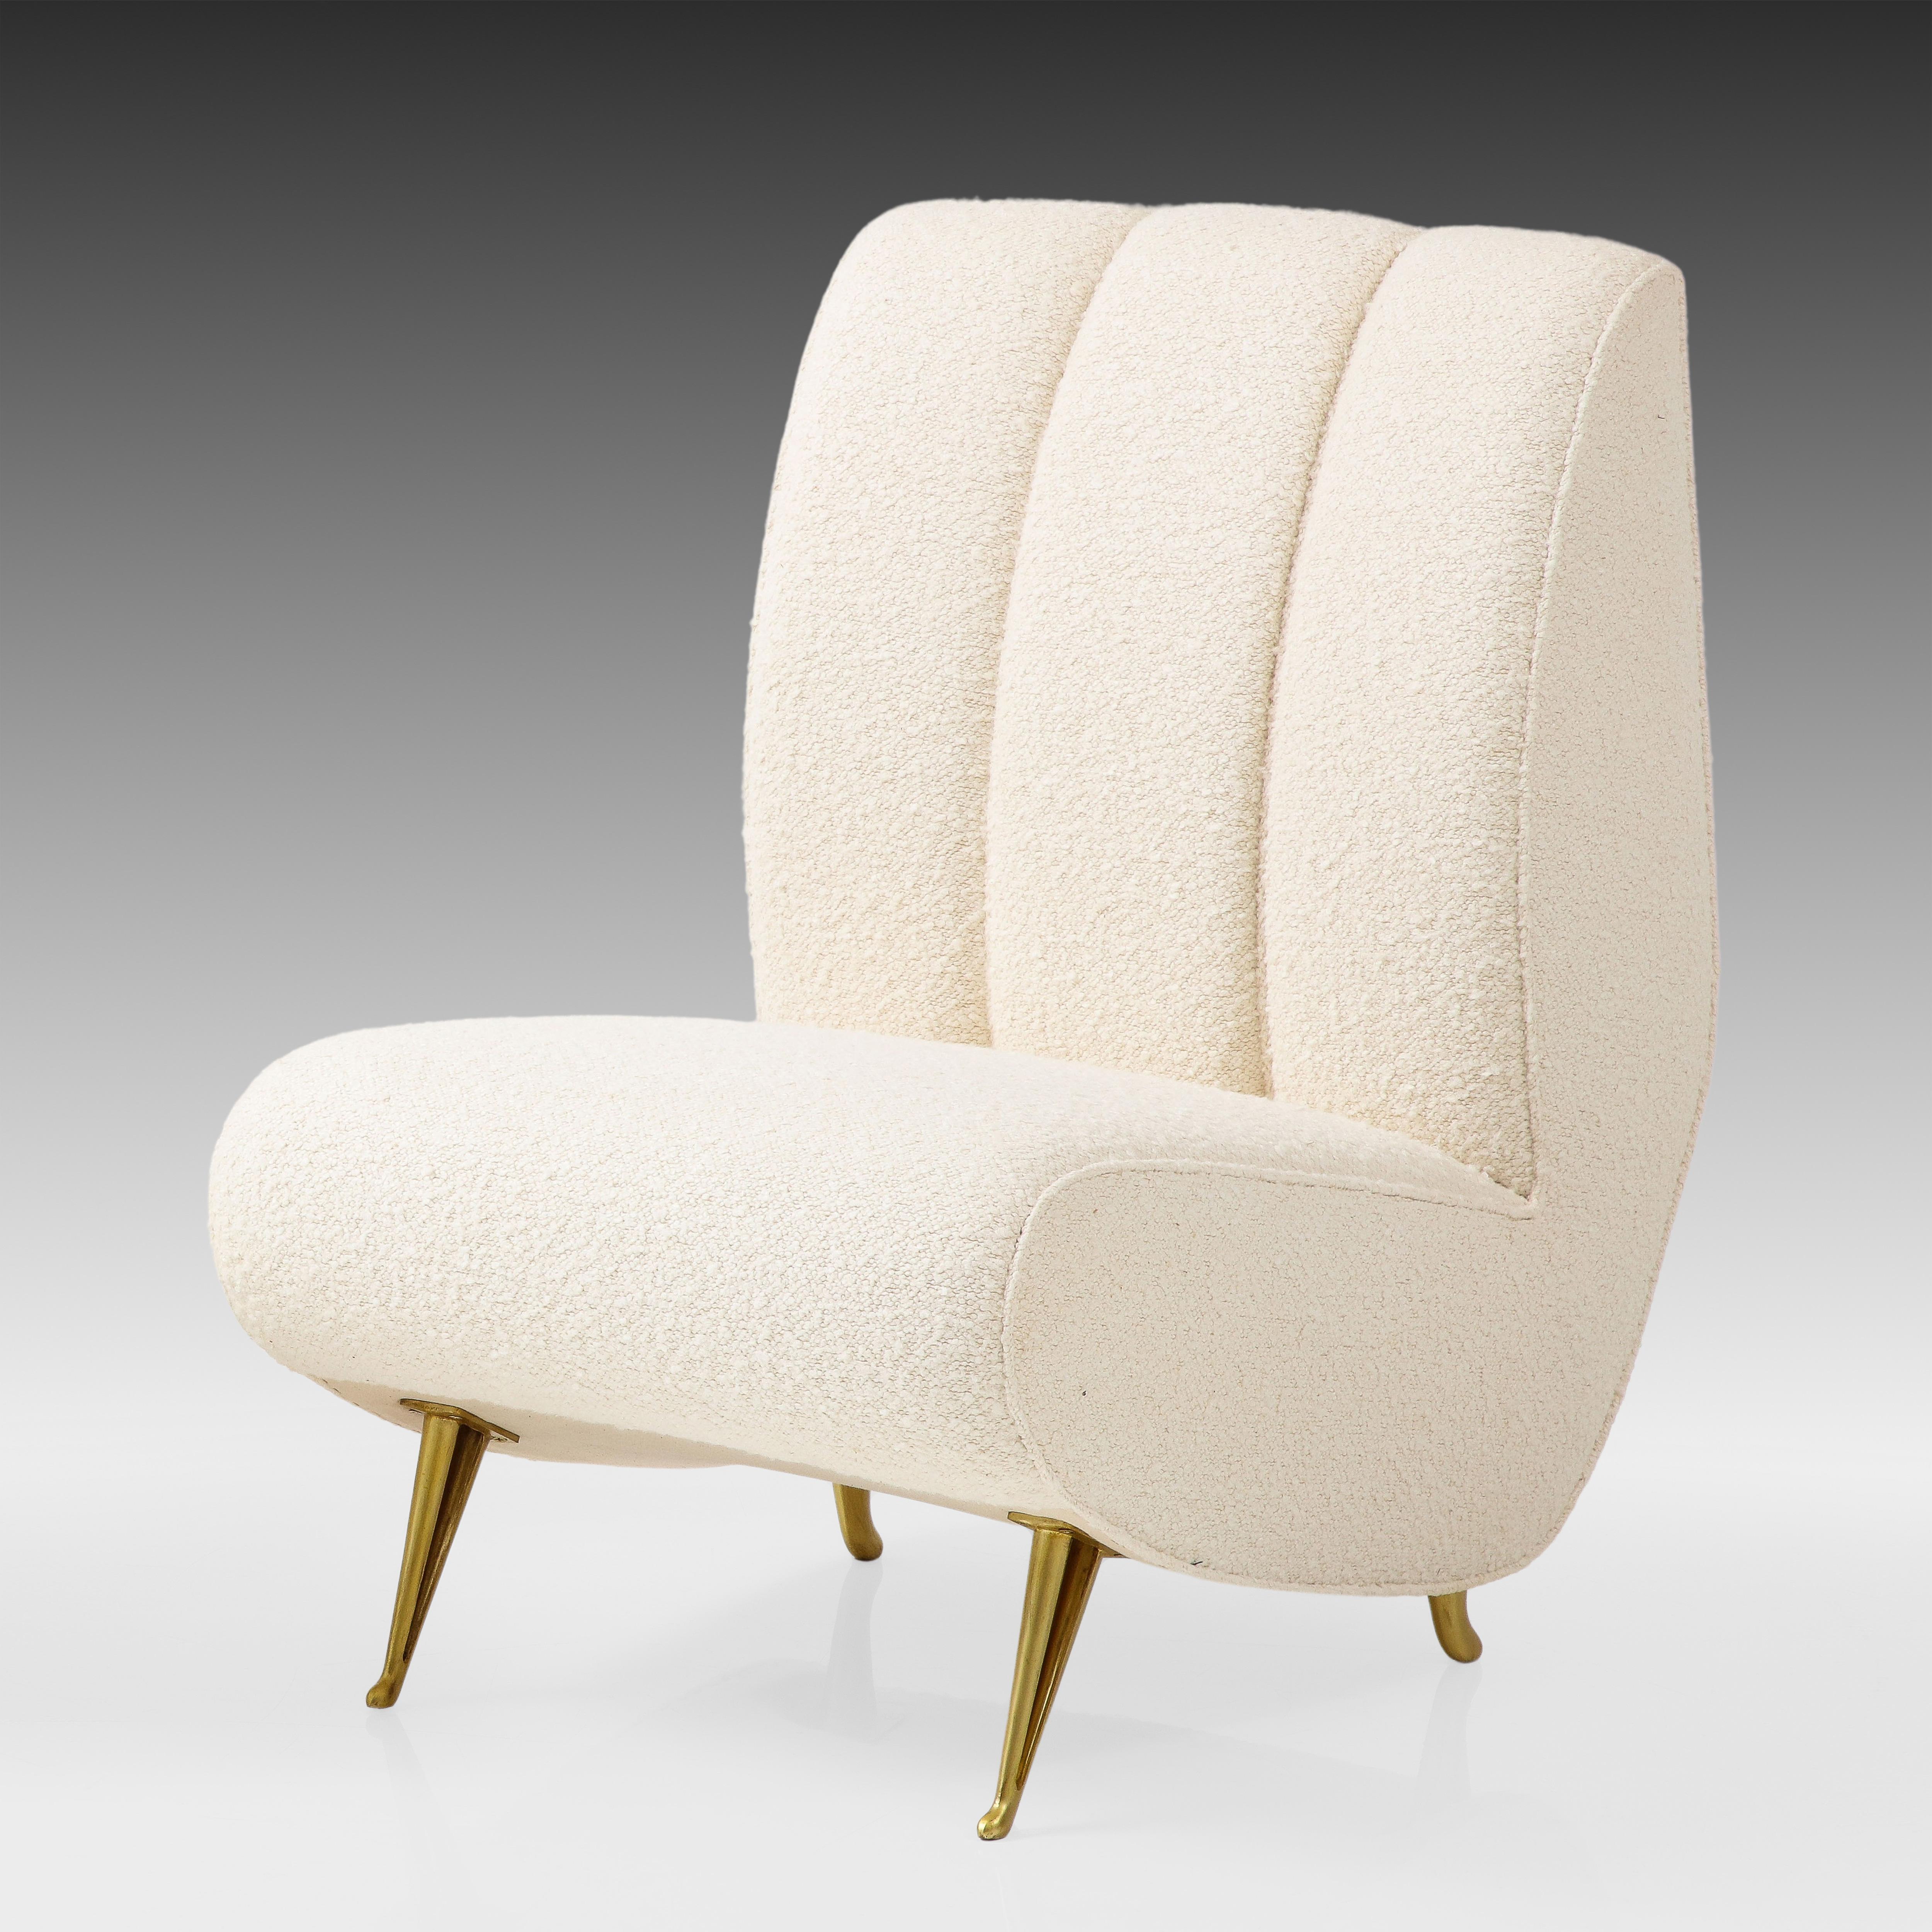 ISA Bergamo Rare Pair of Lounge or Slipper Chairs in Ivory Bouclé, Italy, 1950s For Sale 1